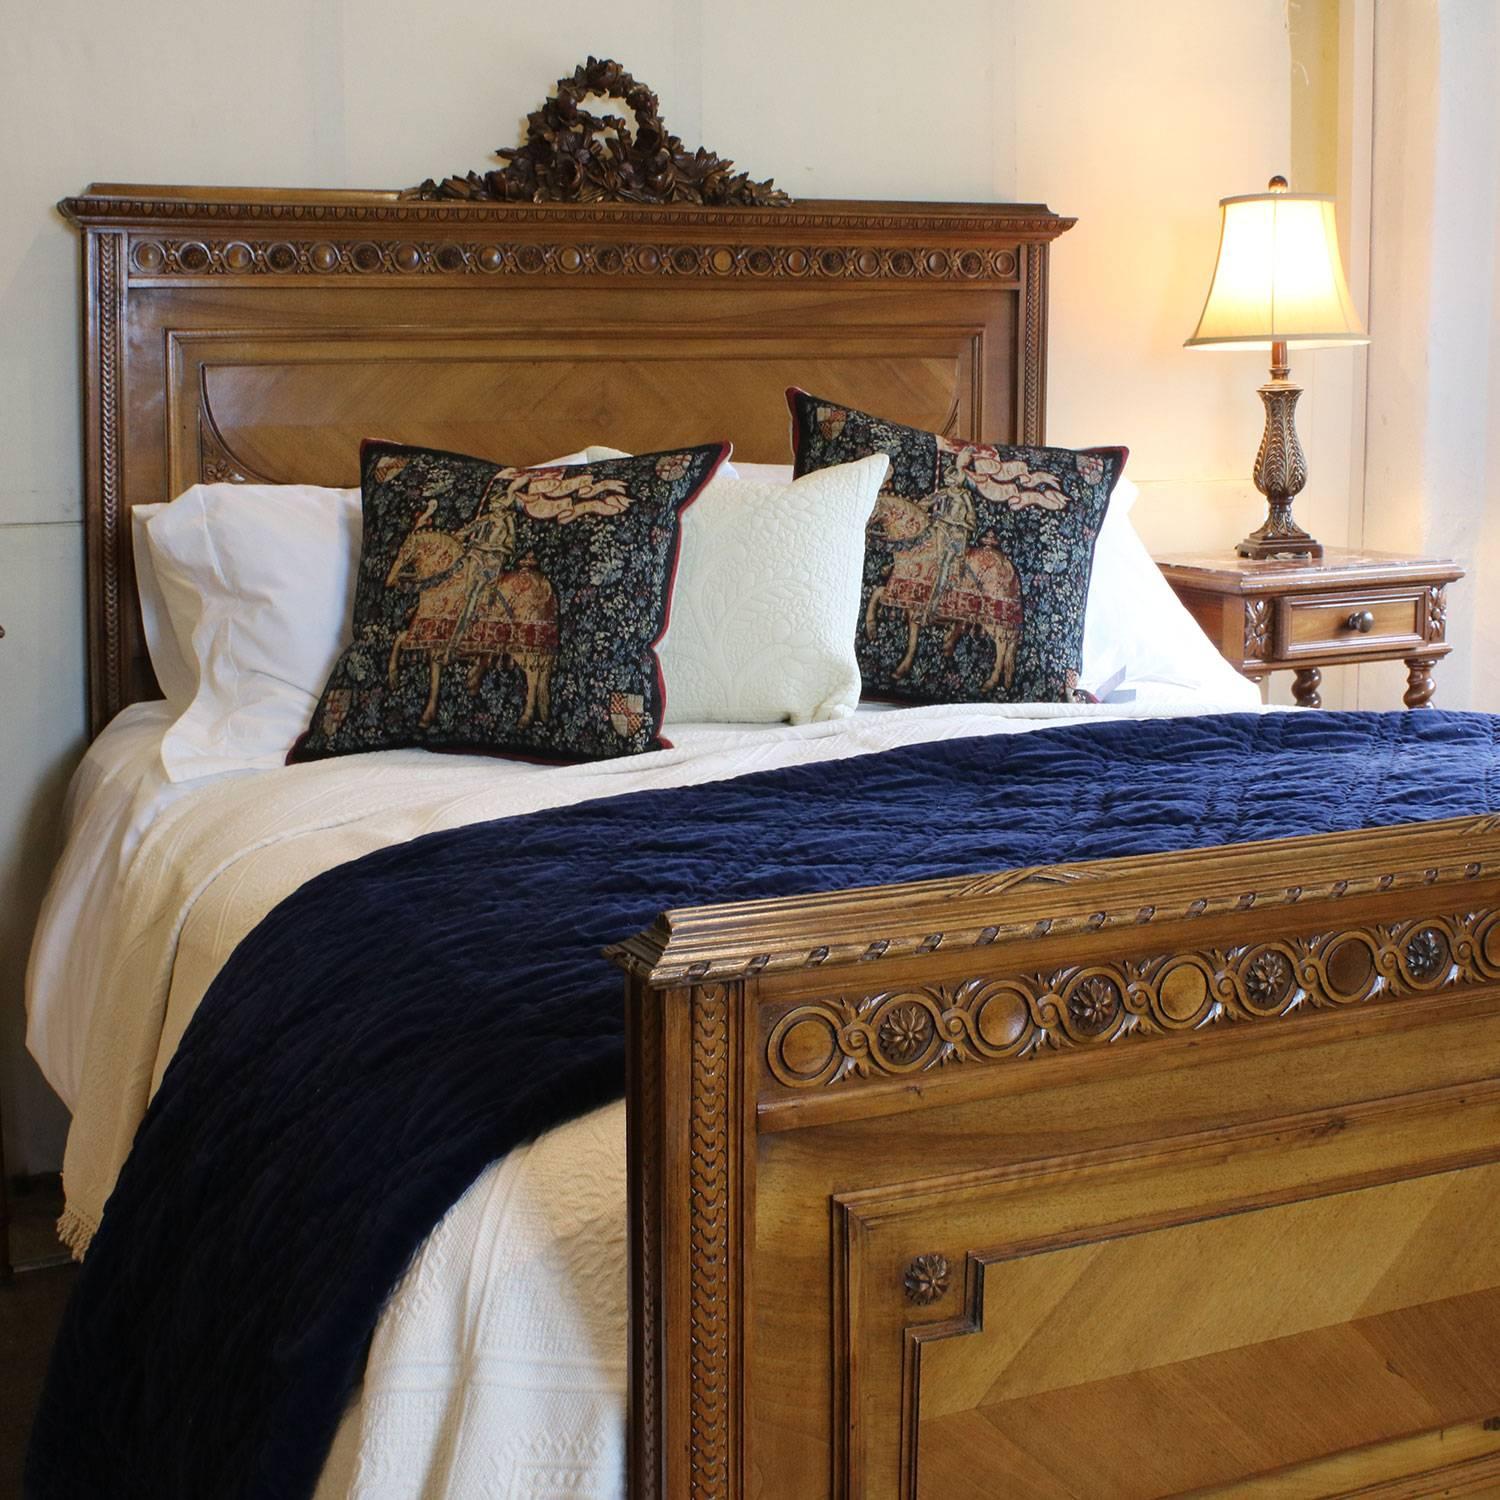 A walnut carved bed with ornate pediment on the head panel and quartered veneer panels.

This bed accepts a British king-size or American queen-size (60 in wide) base and mattress set.

The price is for the bedstead alone. The base, mattress and